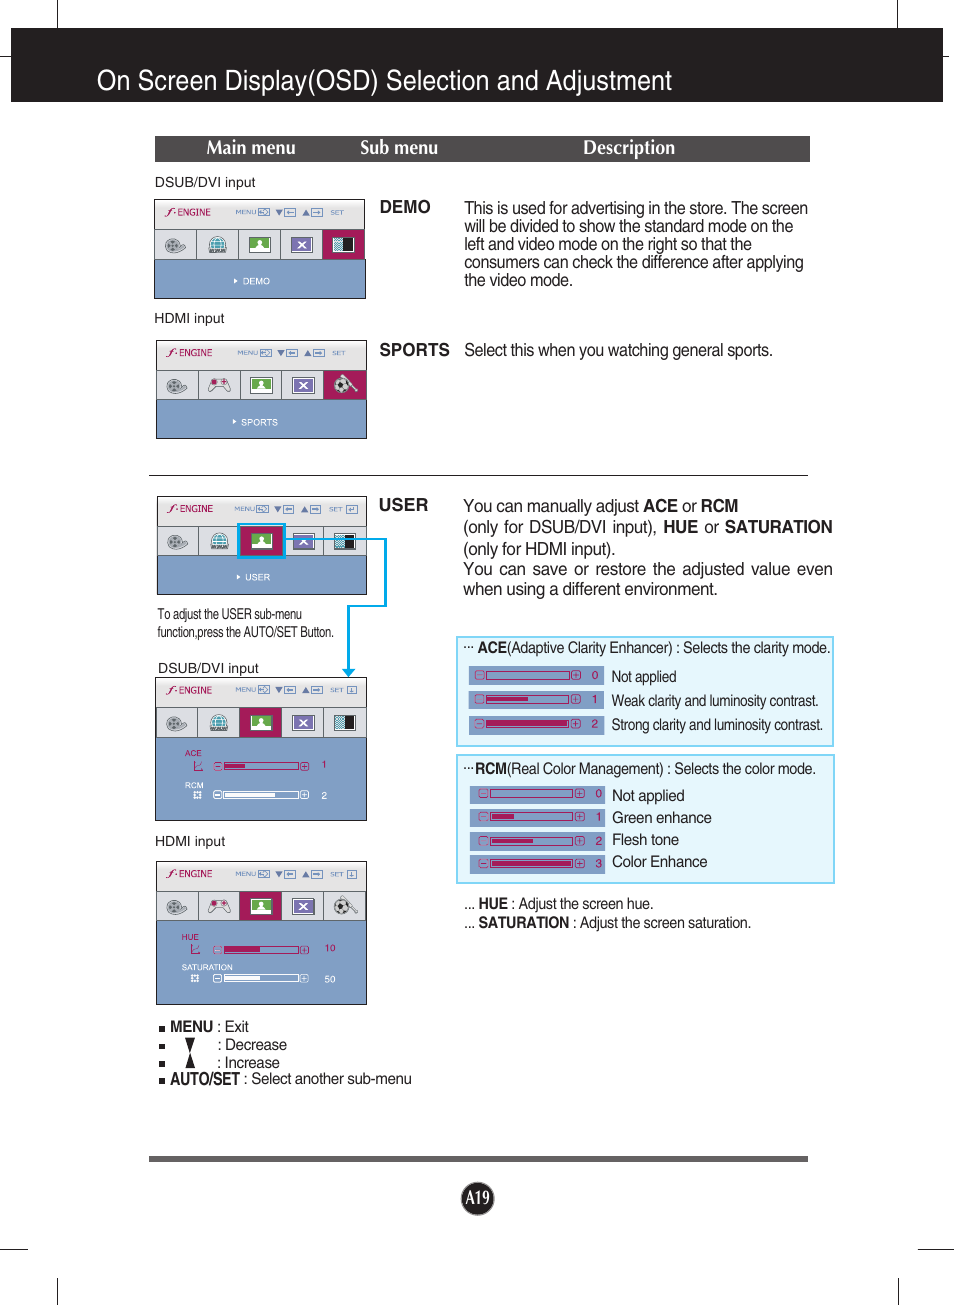 On screen display(osd) selection and adjustment | LG W2453V-PF User Manual | Page 20 / 26